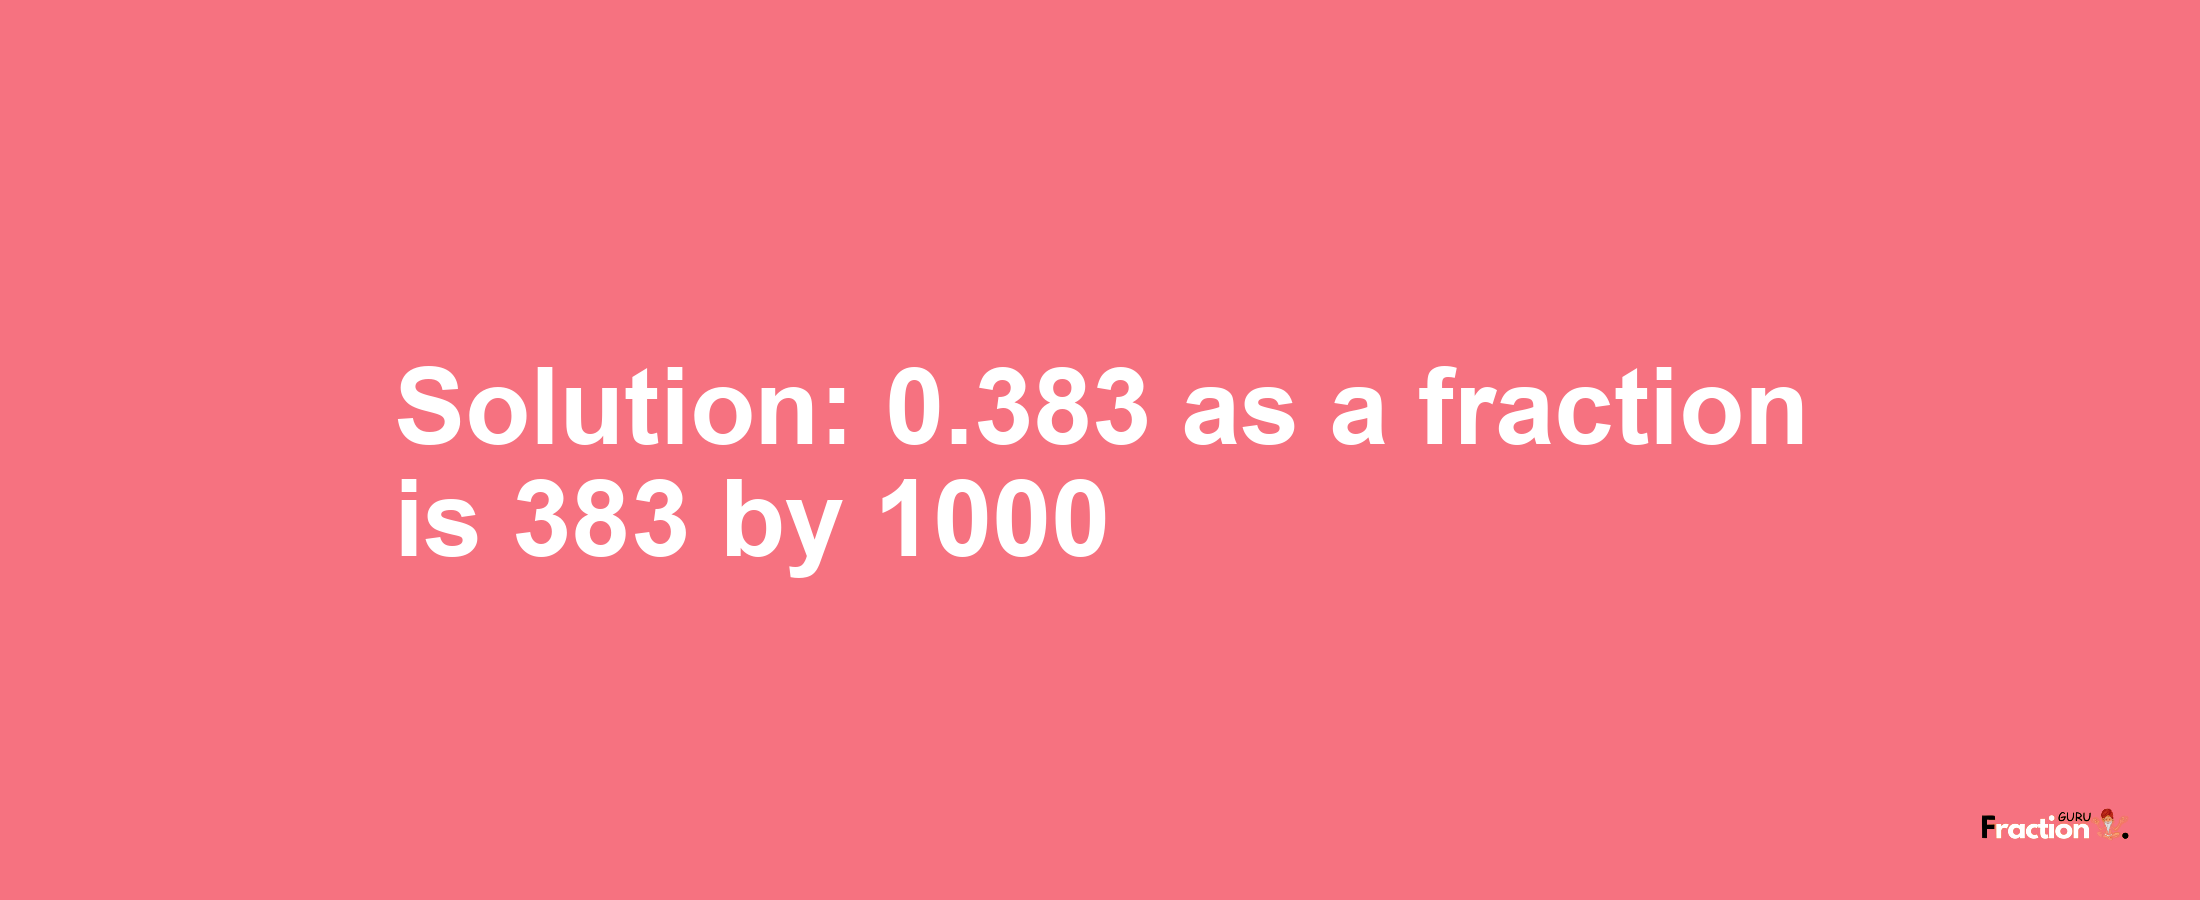 Solution:0.383 as a fraction is 383/1000